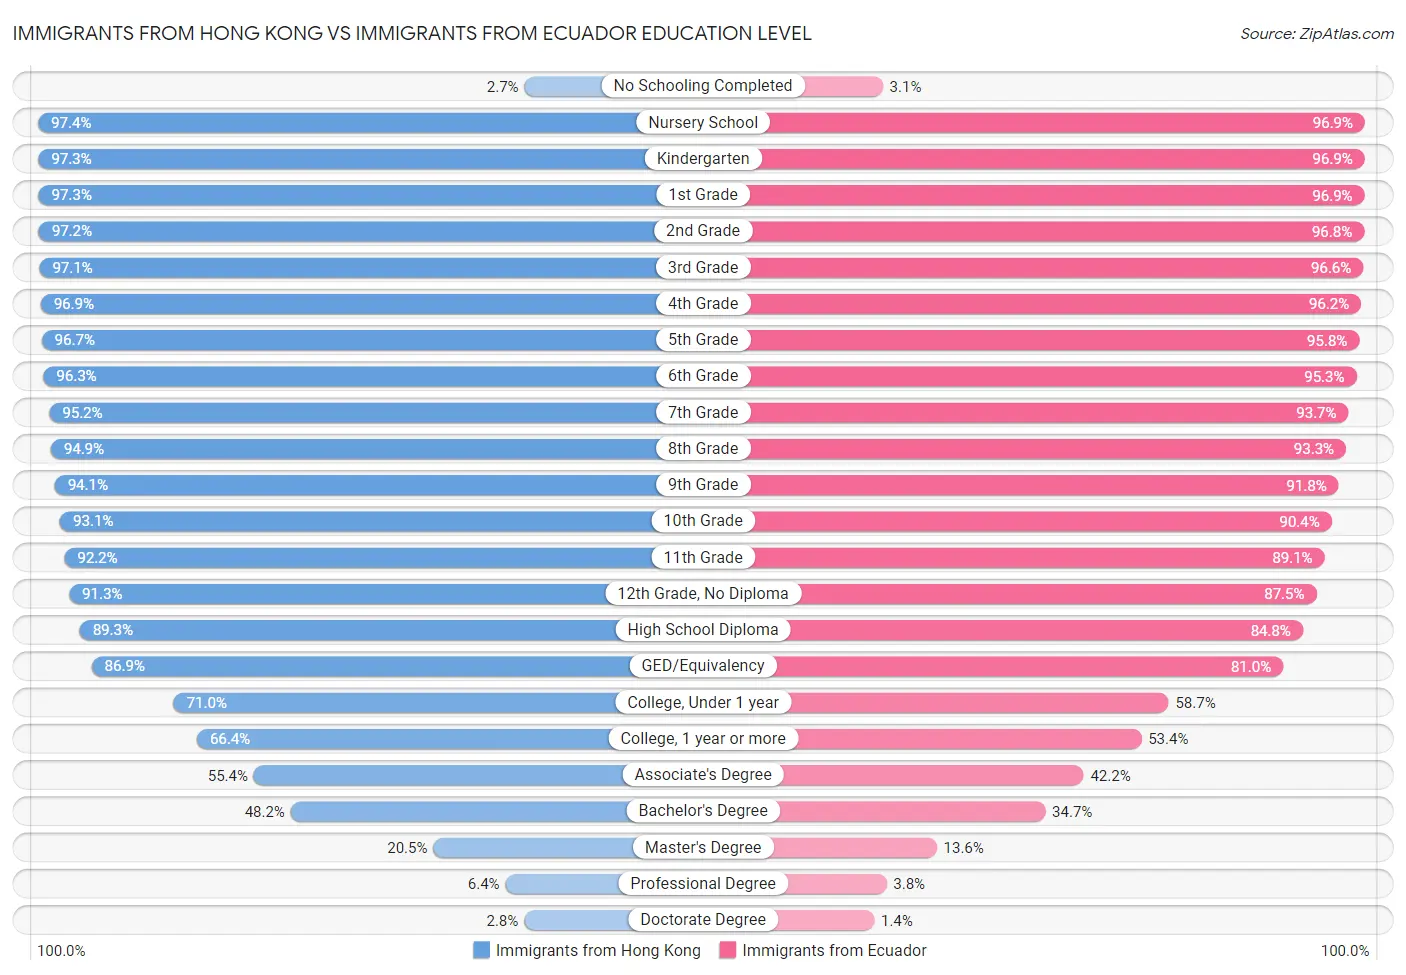 Immigrants from Hong Kong vs Immigrants from Ecuador Education Level